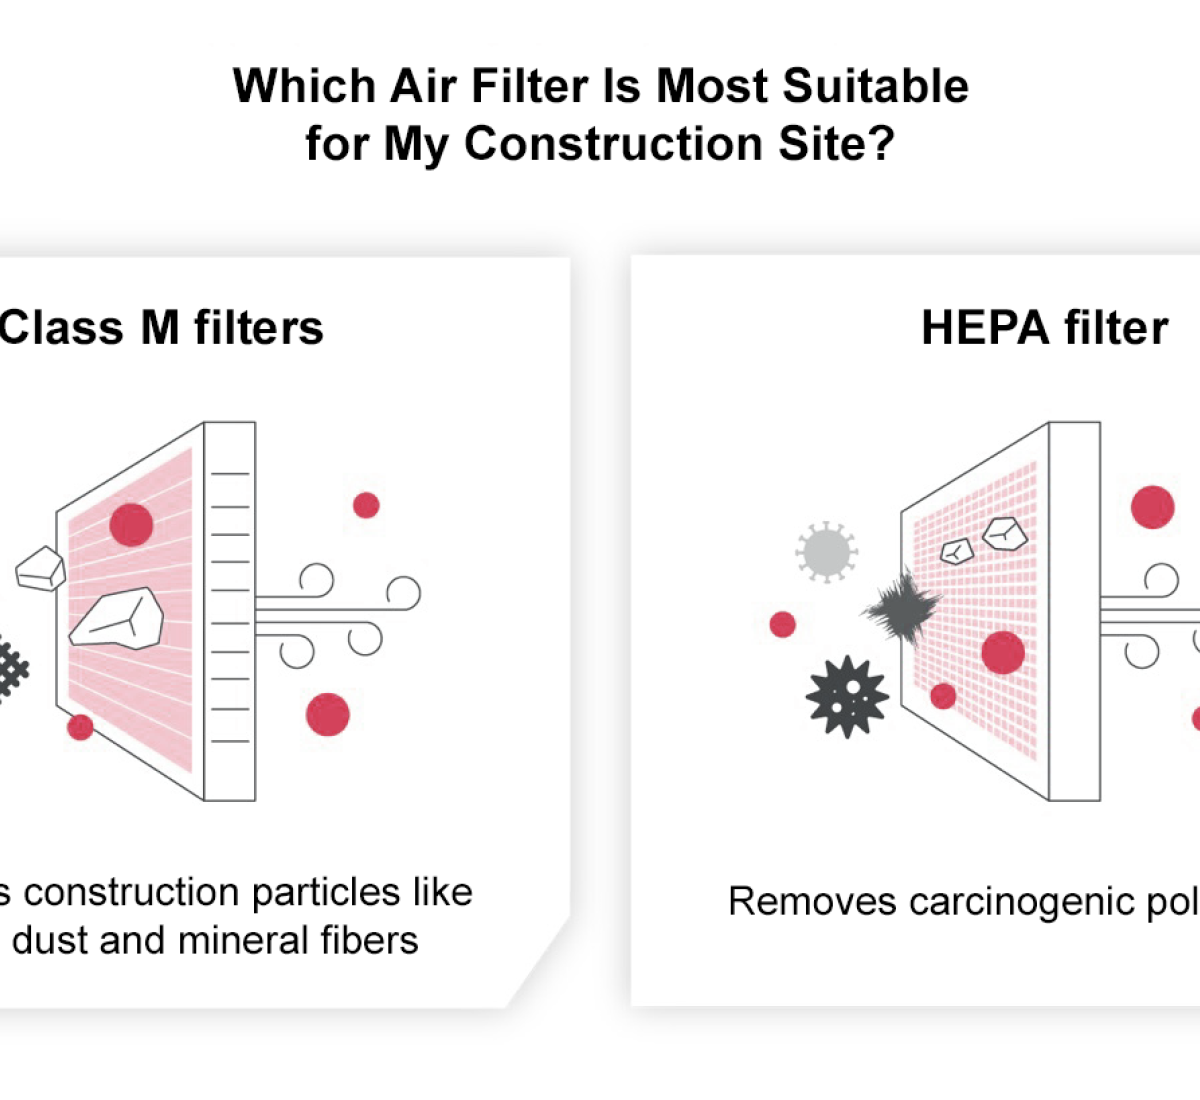 Which Air Filter Is Most Suitable for My Construction Site?